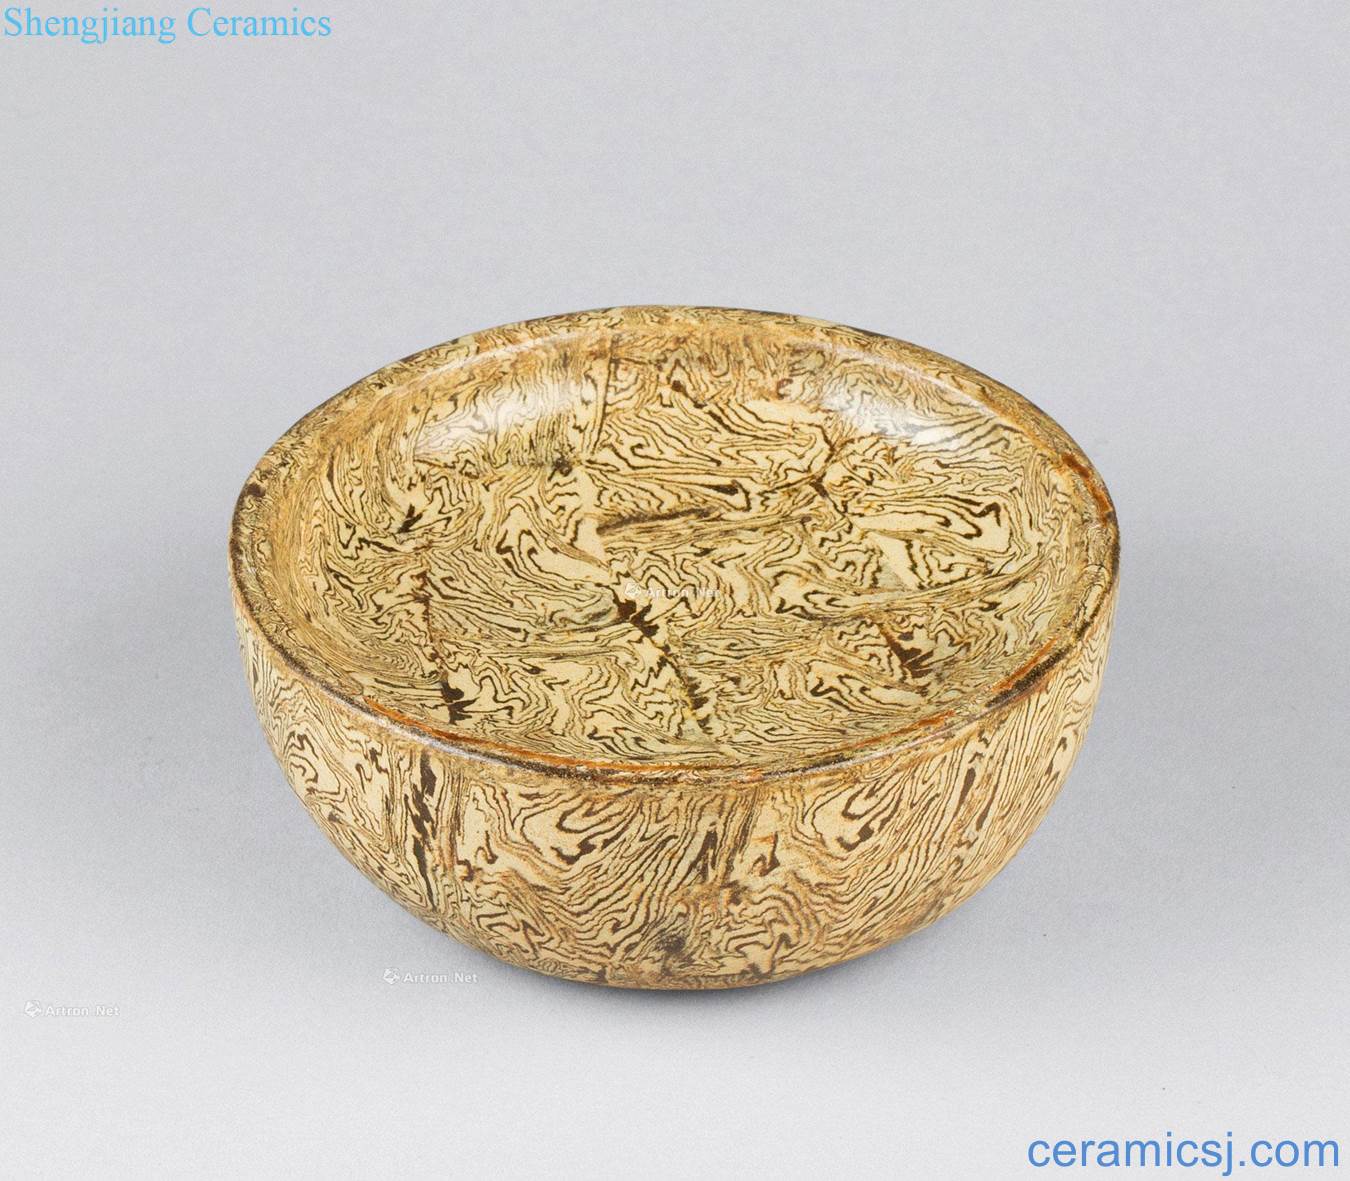 The song dynasty (960-1279), twisted placenta zhuge bowl